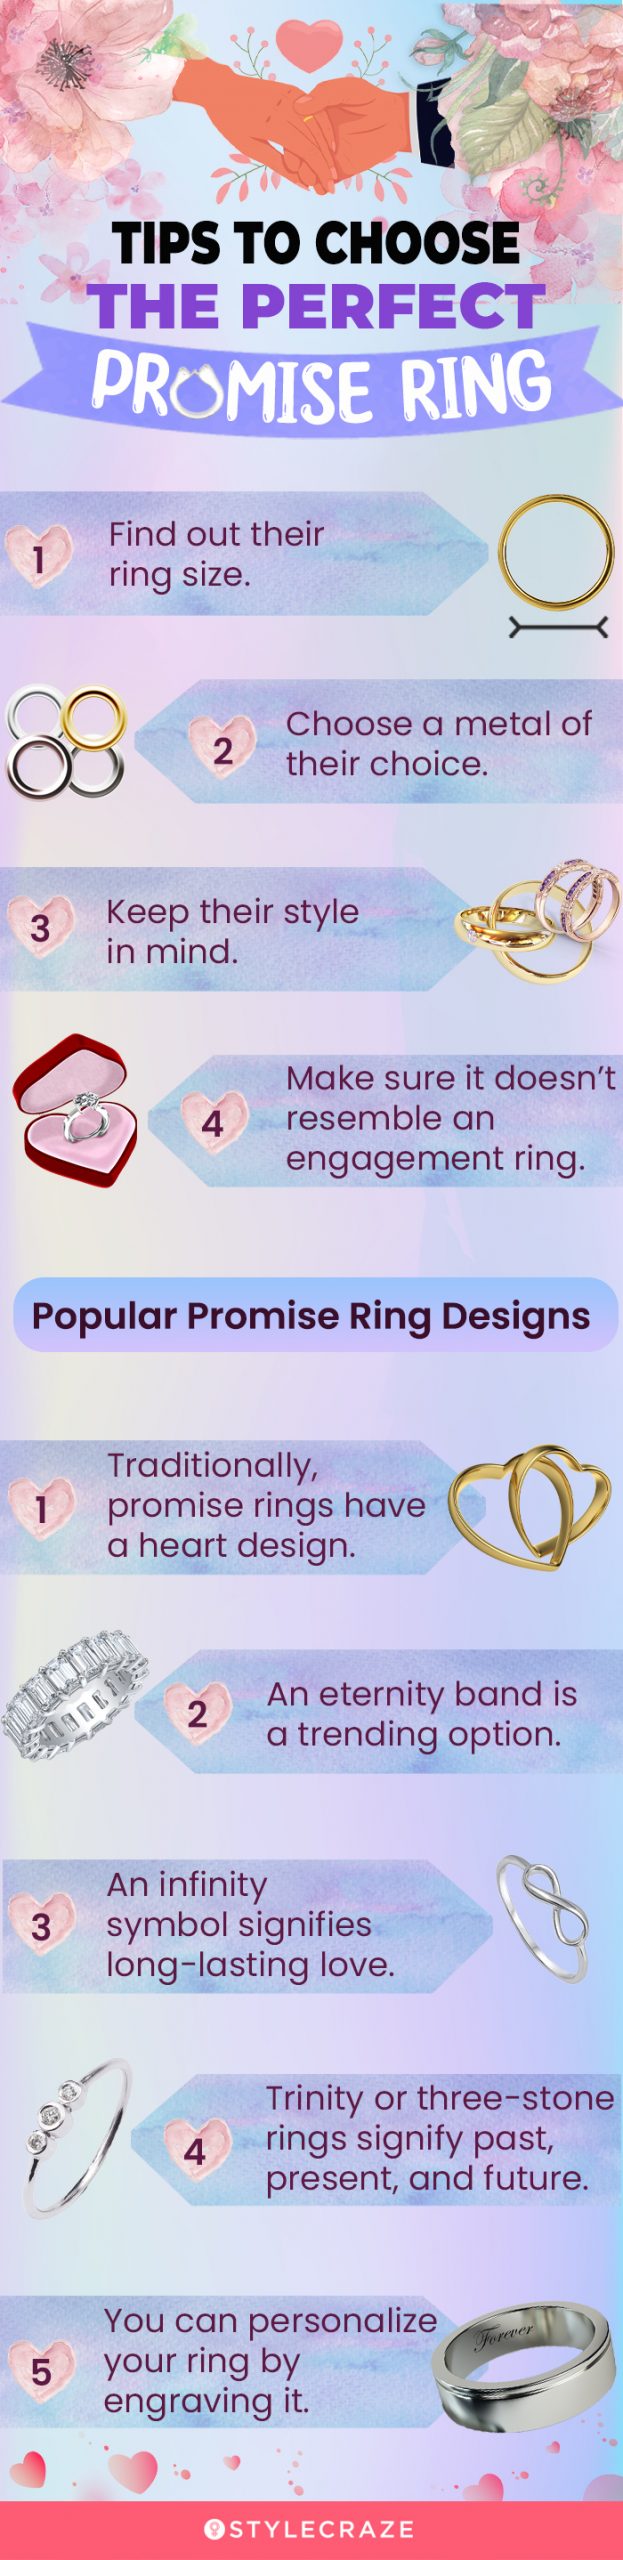 tips to choose the perfect promise ring (infographic)